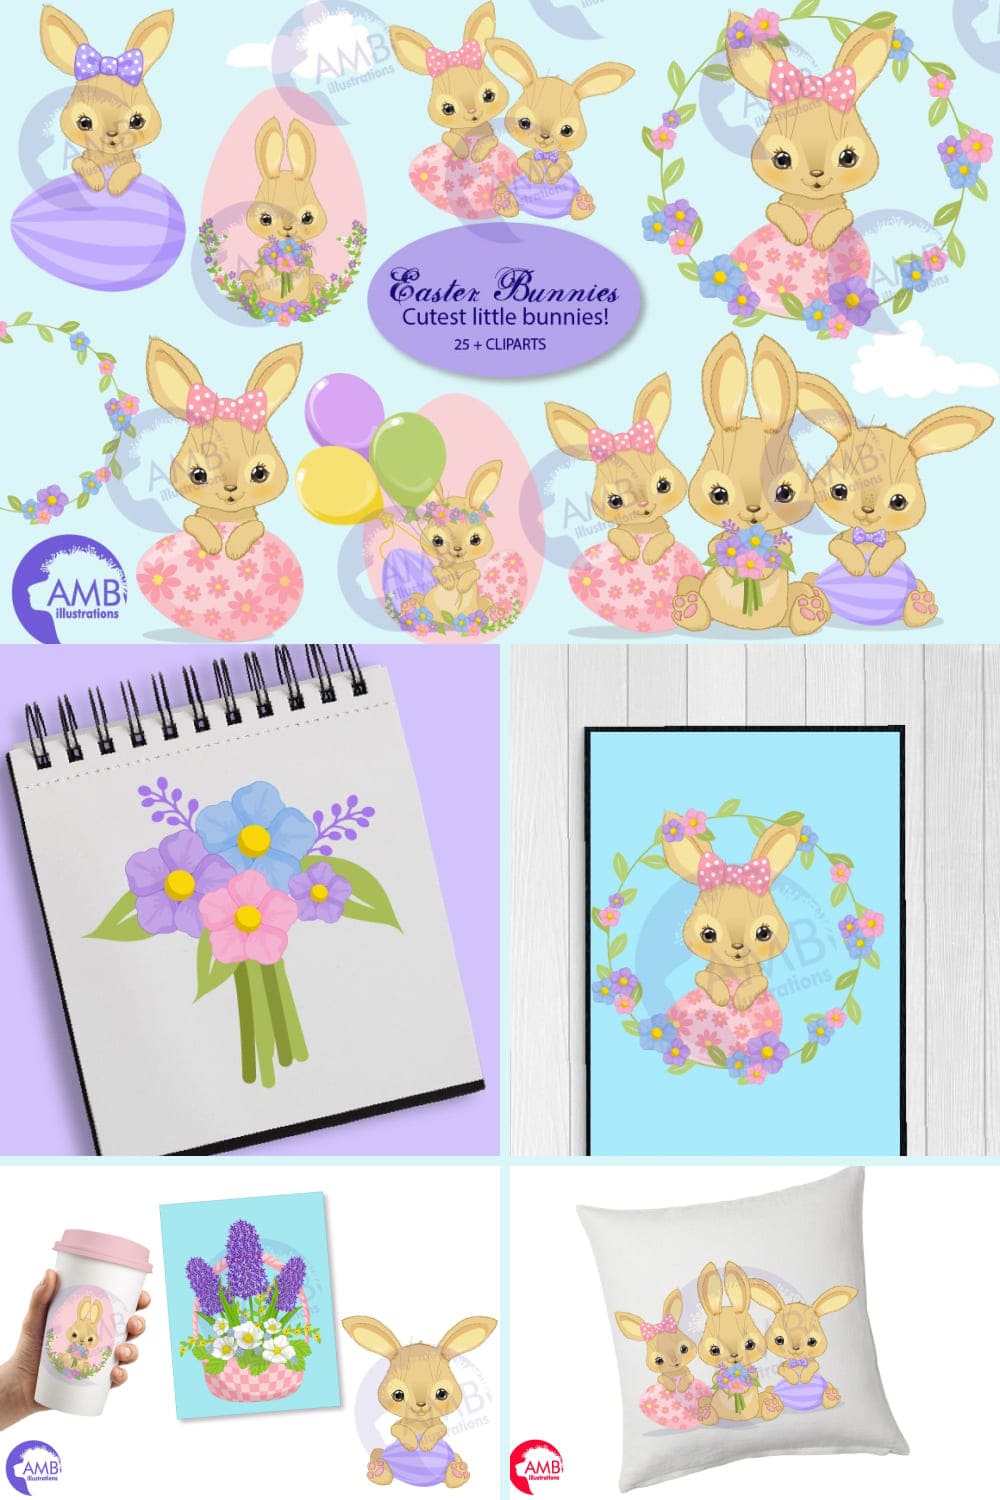 Easter bunnies clipart, picture for pinterest 1000 by 1500 pixels.